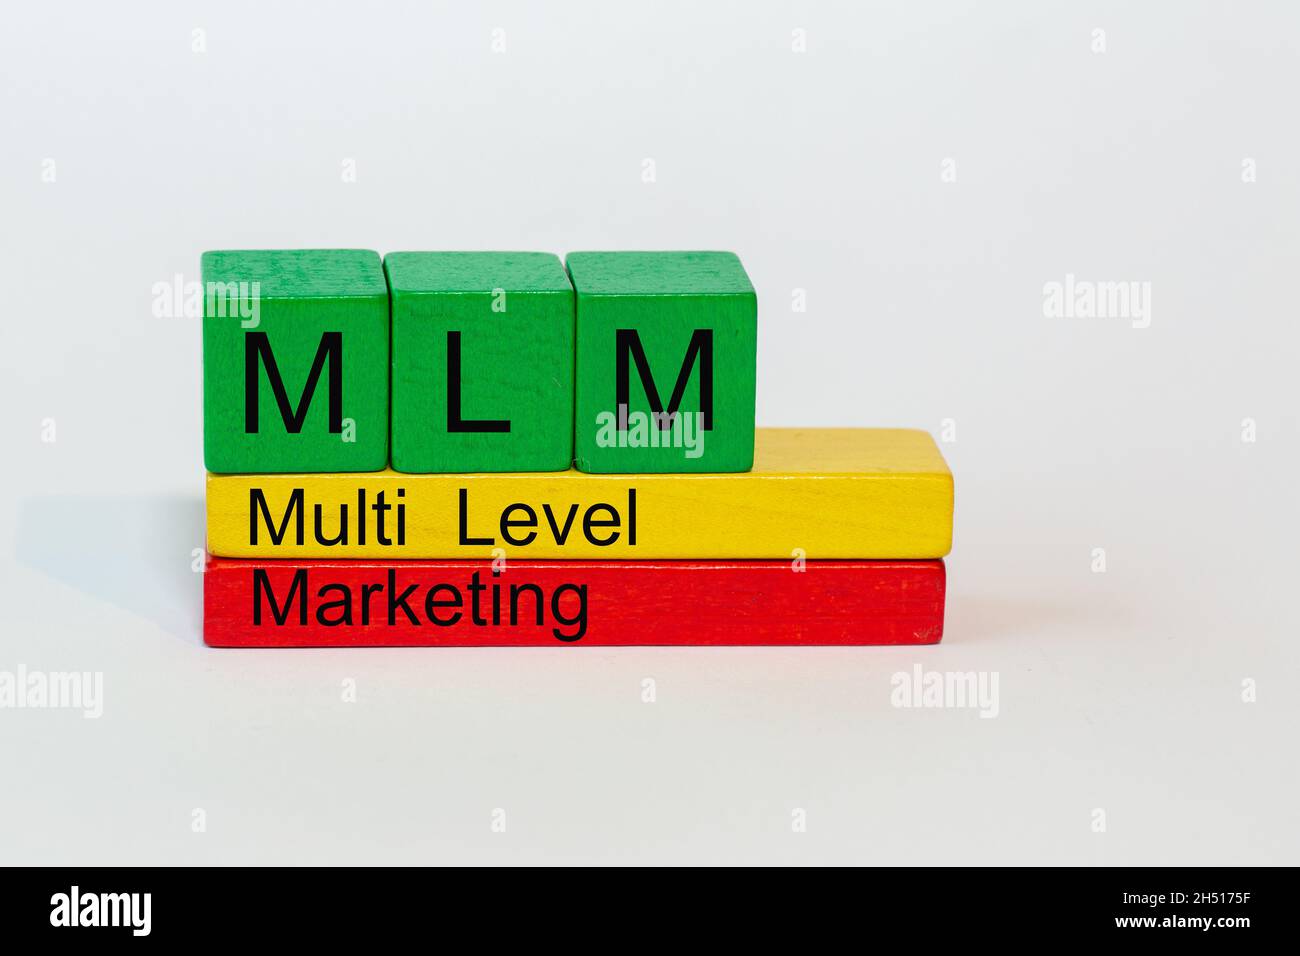 MLM is the abbreviation of Multi Level Marketing and stands on colorful toy blocks isolated against a white background Stock Photo